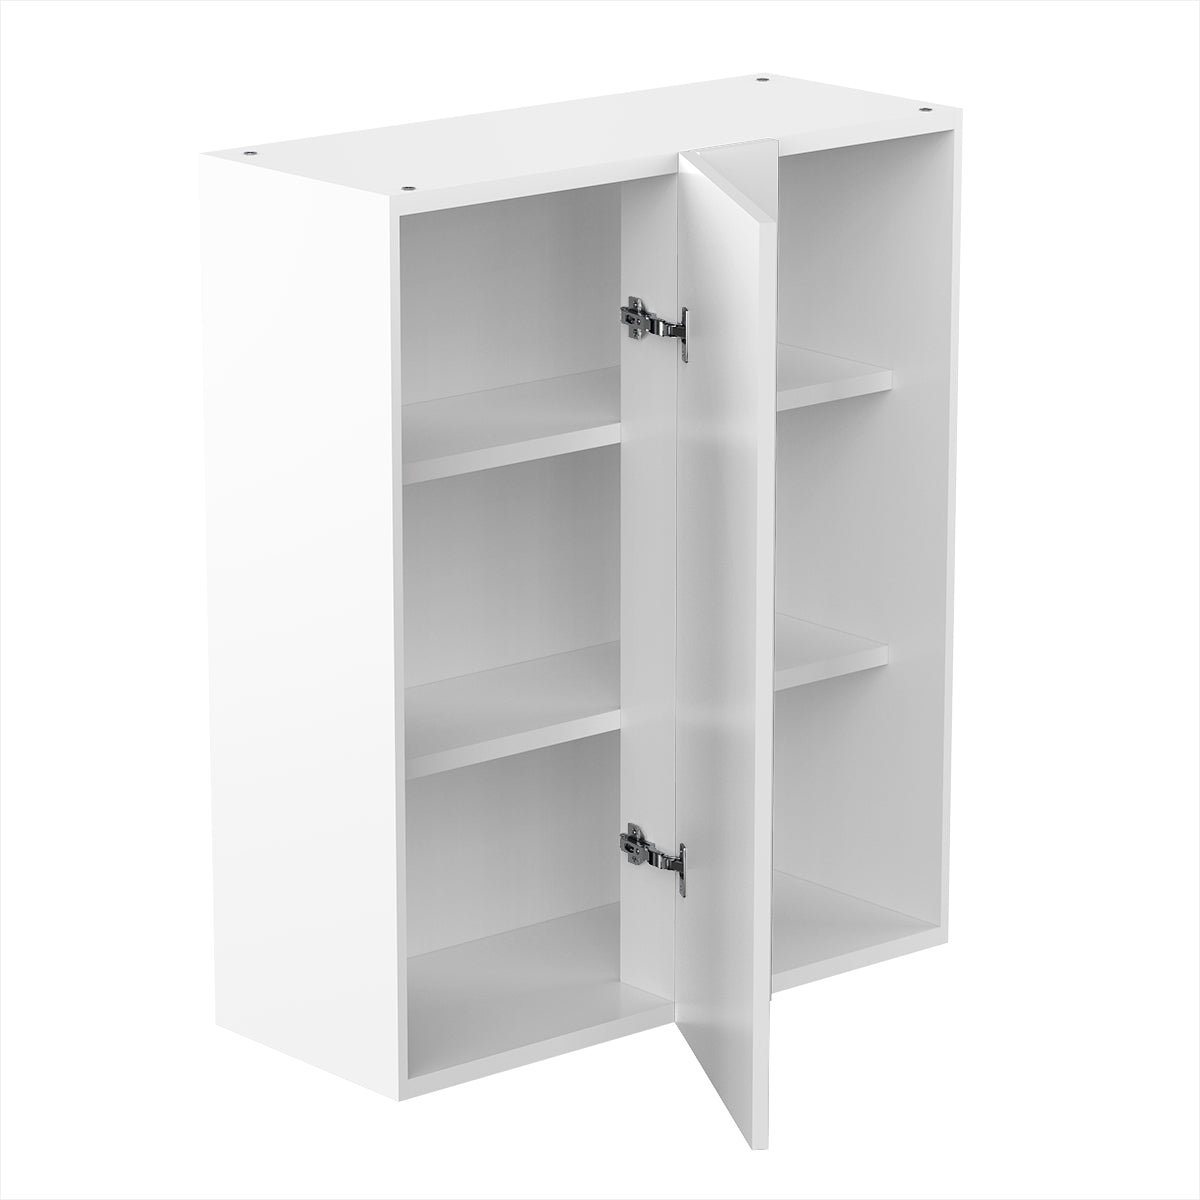 RTA - Glossy White - Single Door Wall Cabinets | 30"W x 36"H x 12"D